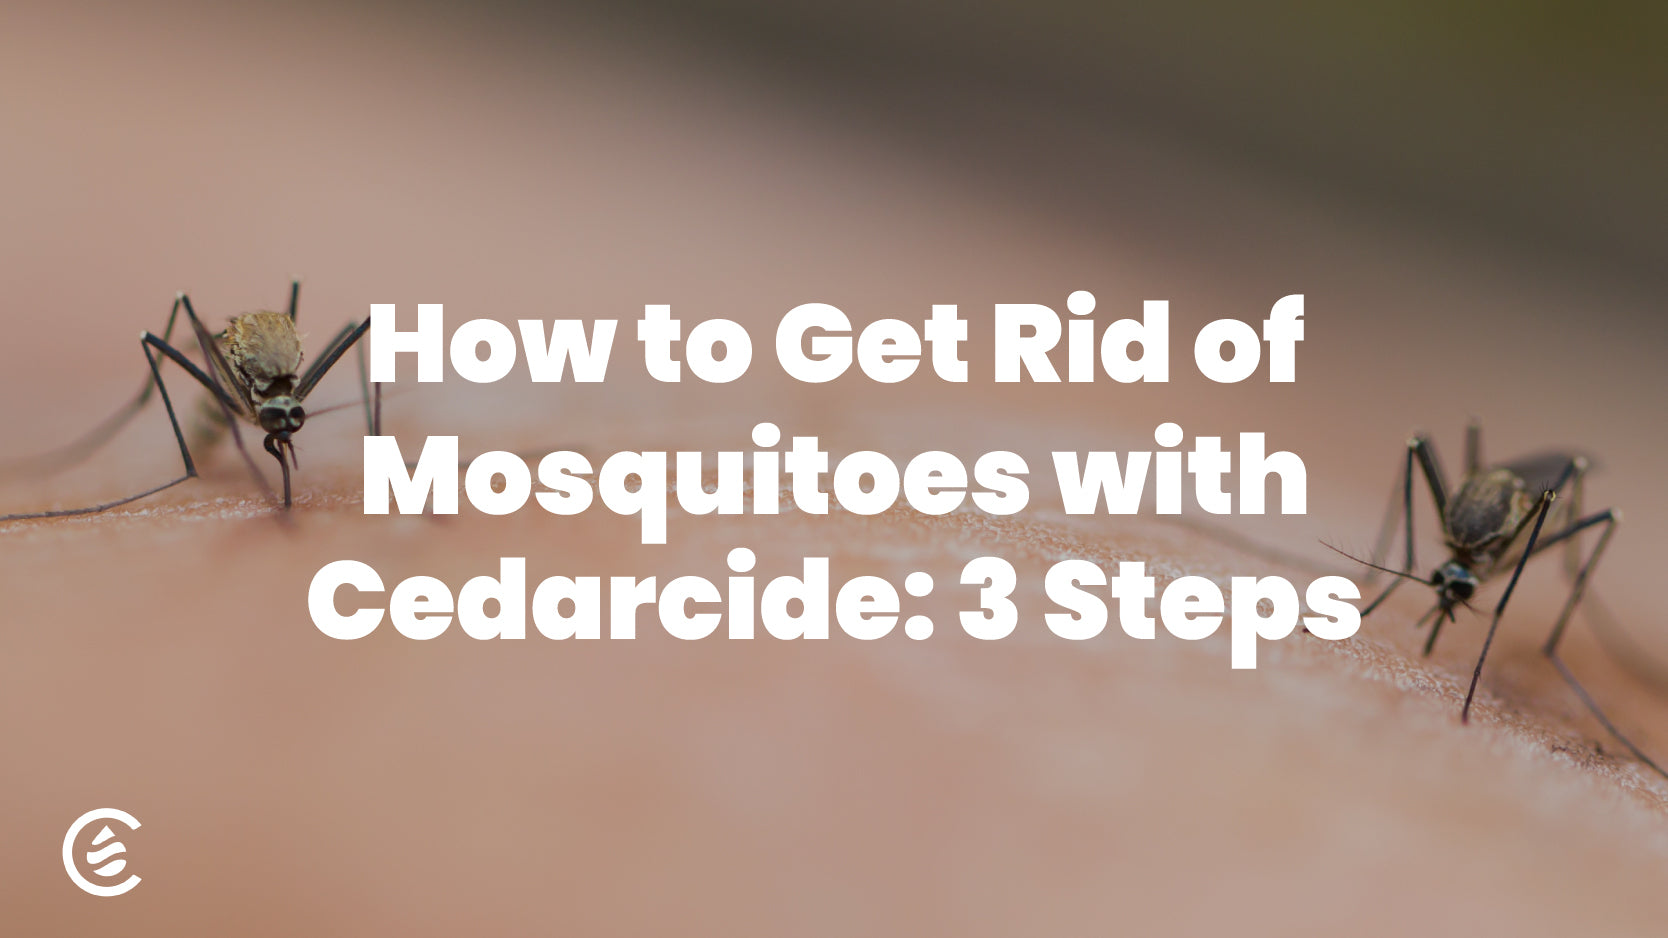 How to Get Rid of Mosquitoes in 3 Steps with Cedarcide, image shows two mosquitoes on human skin